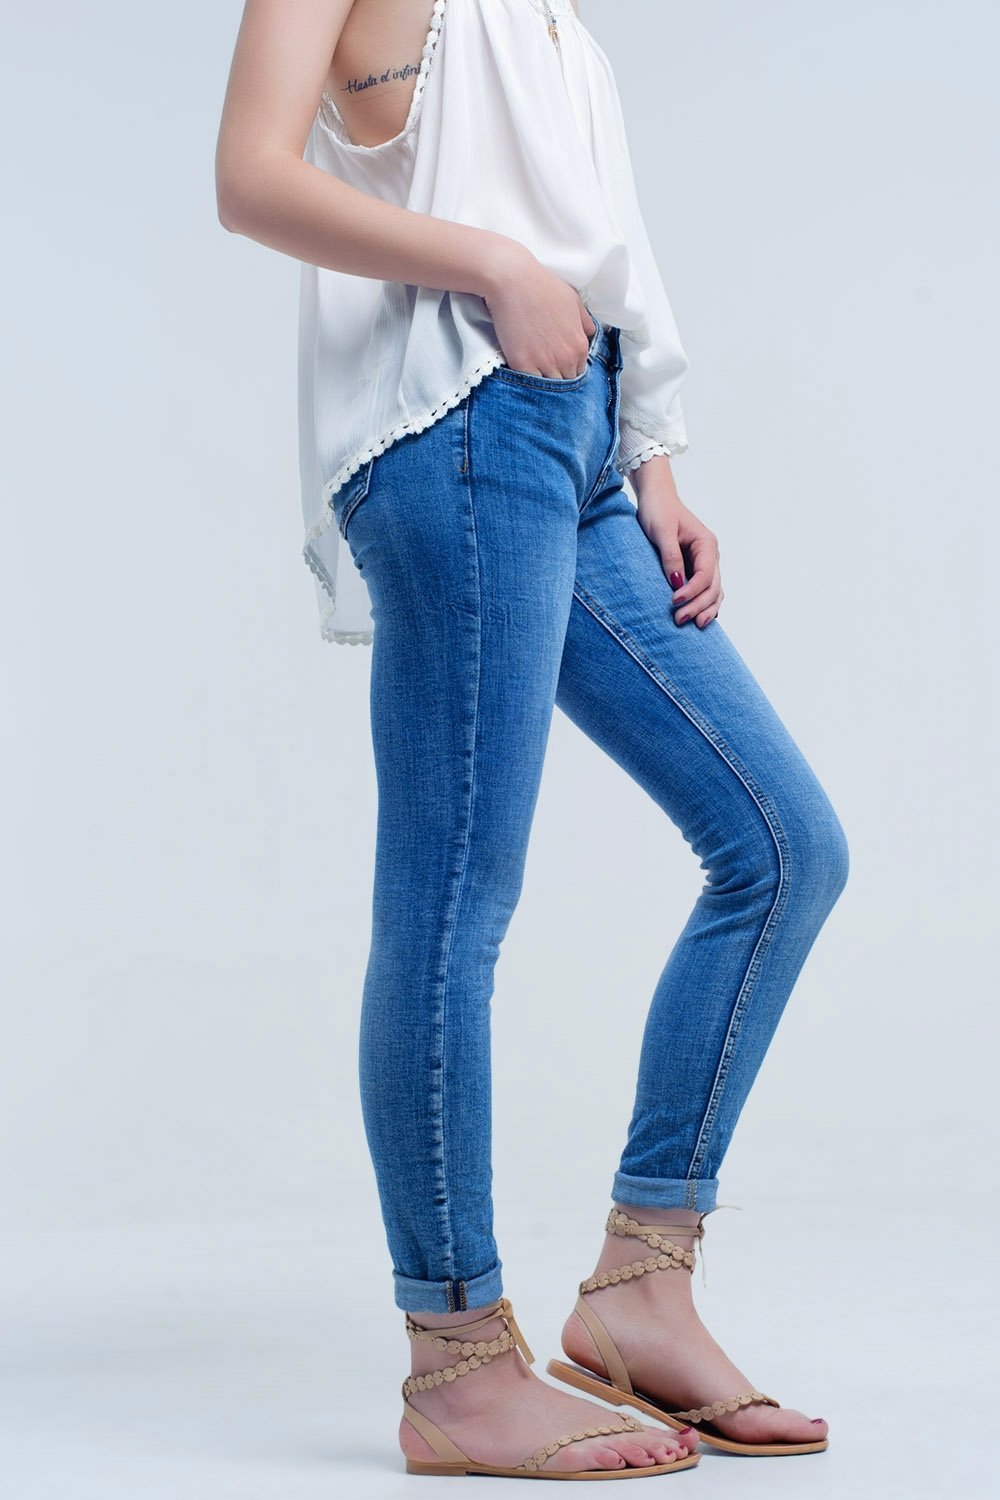 Women's Basic Jeans Pants with Functional Pockets